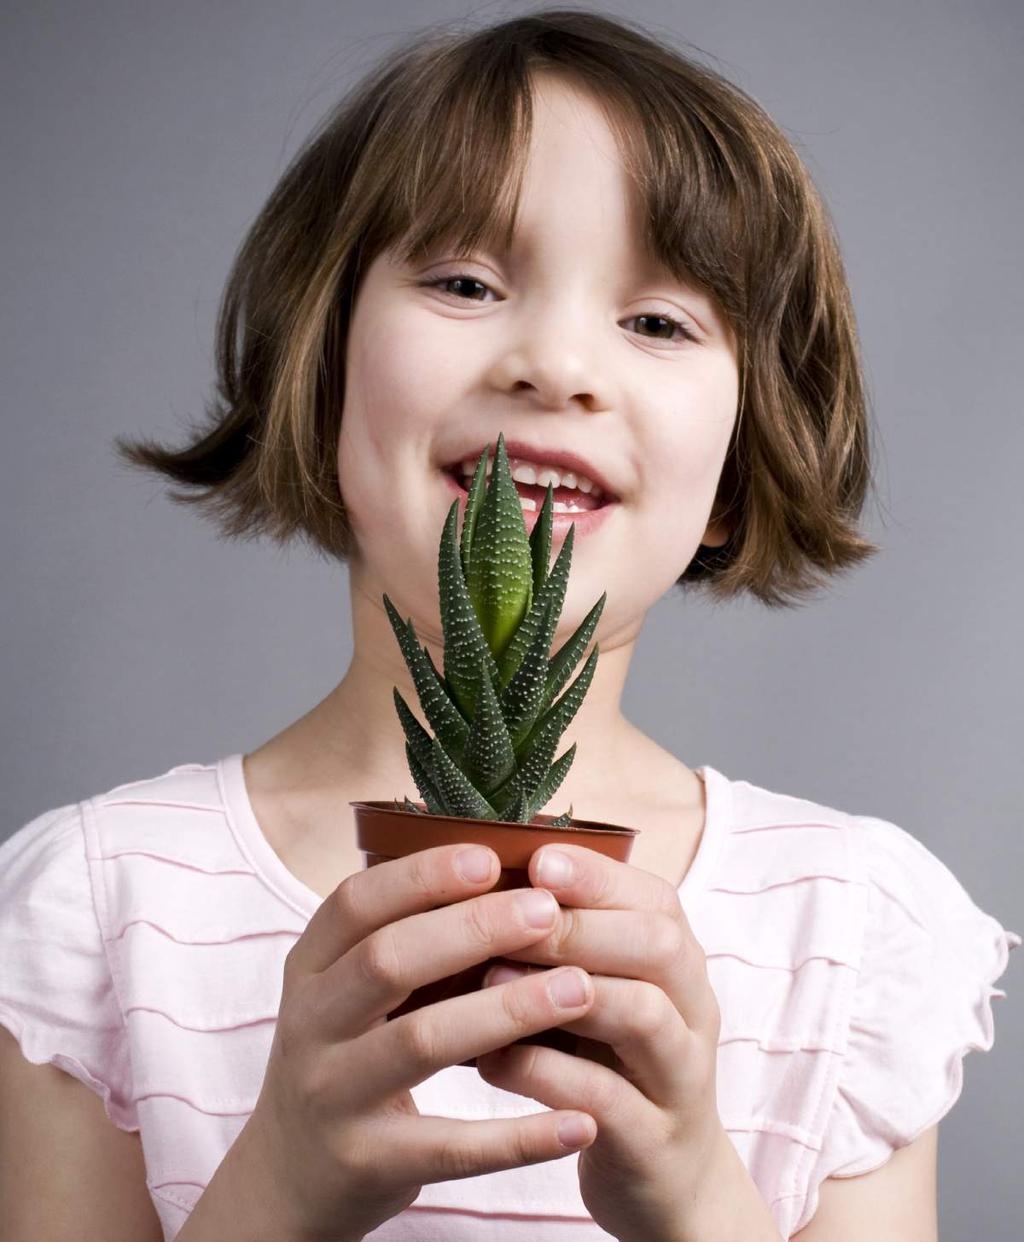 ALOE VERA FOR KIDS AND BABIES Tips and feedback from our happy customers: I used it directly on my skin and in a mix